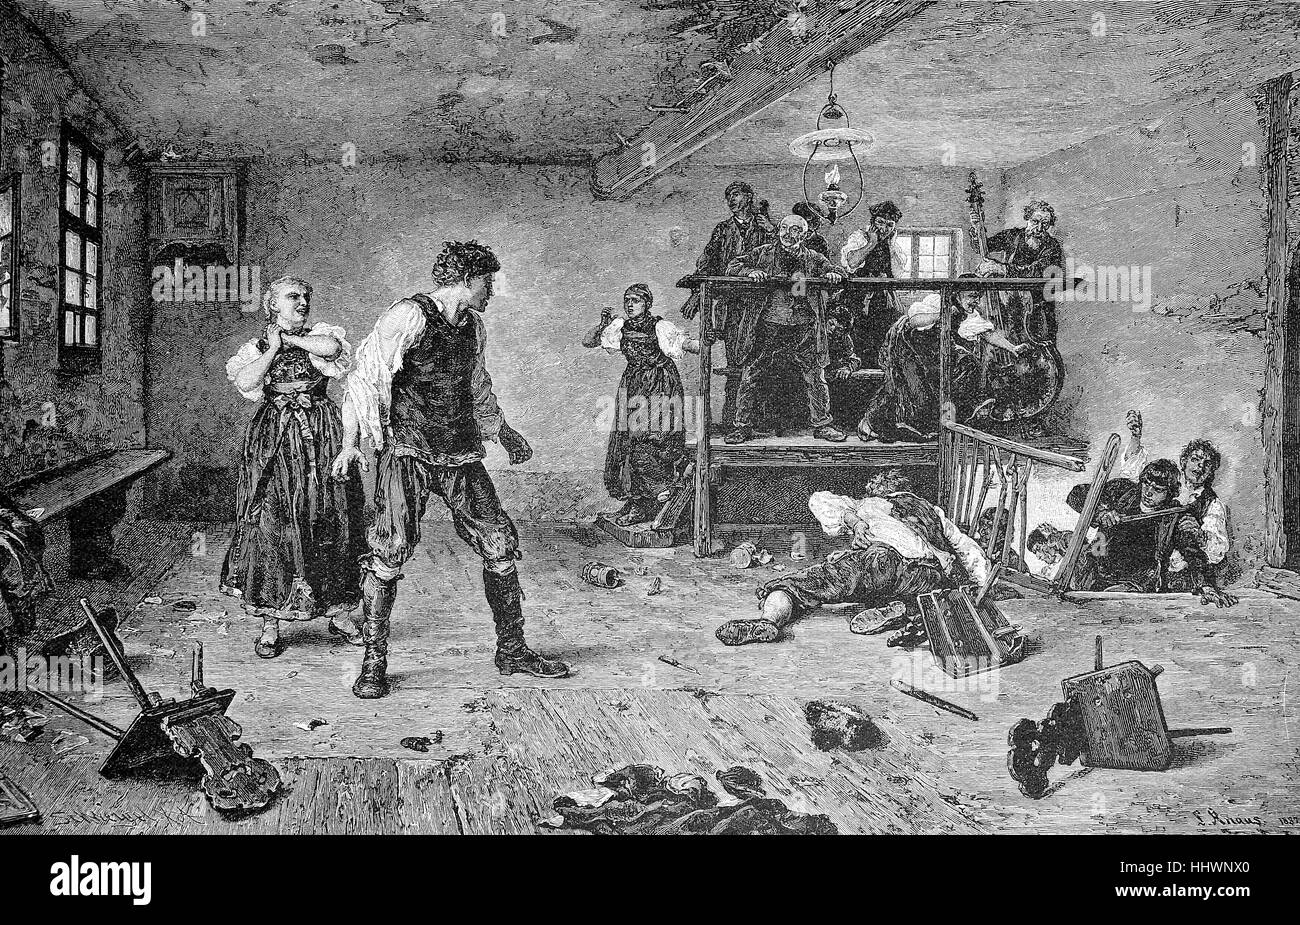 After a fight in an inn, Germany, historical image or illustration, published 1890, digital improved Stock Photo